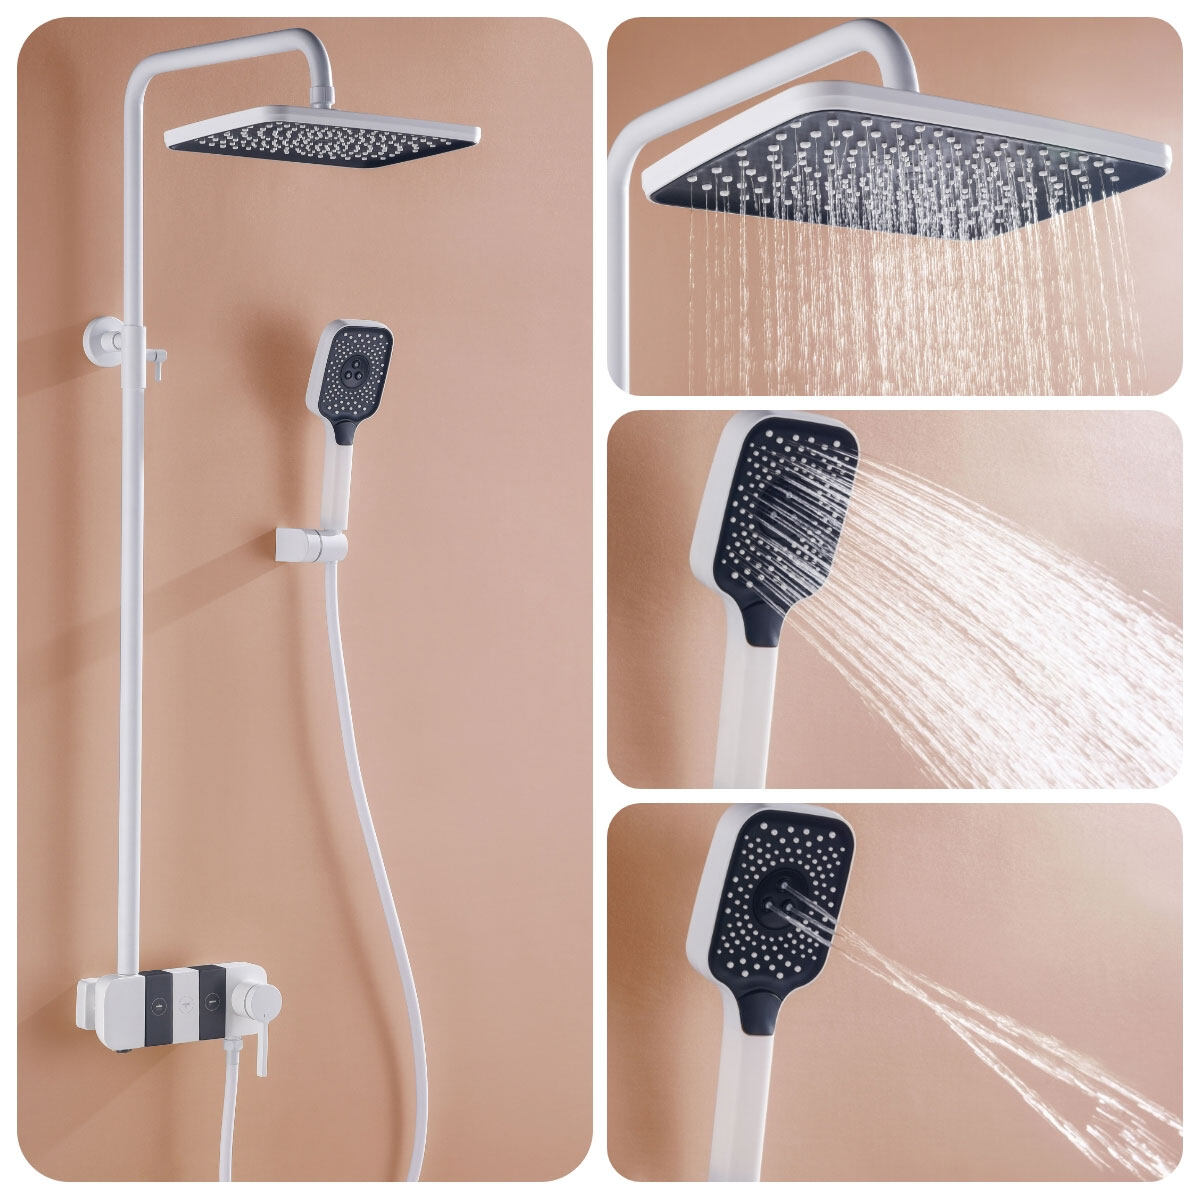 thermostatic faucet shower